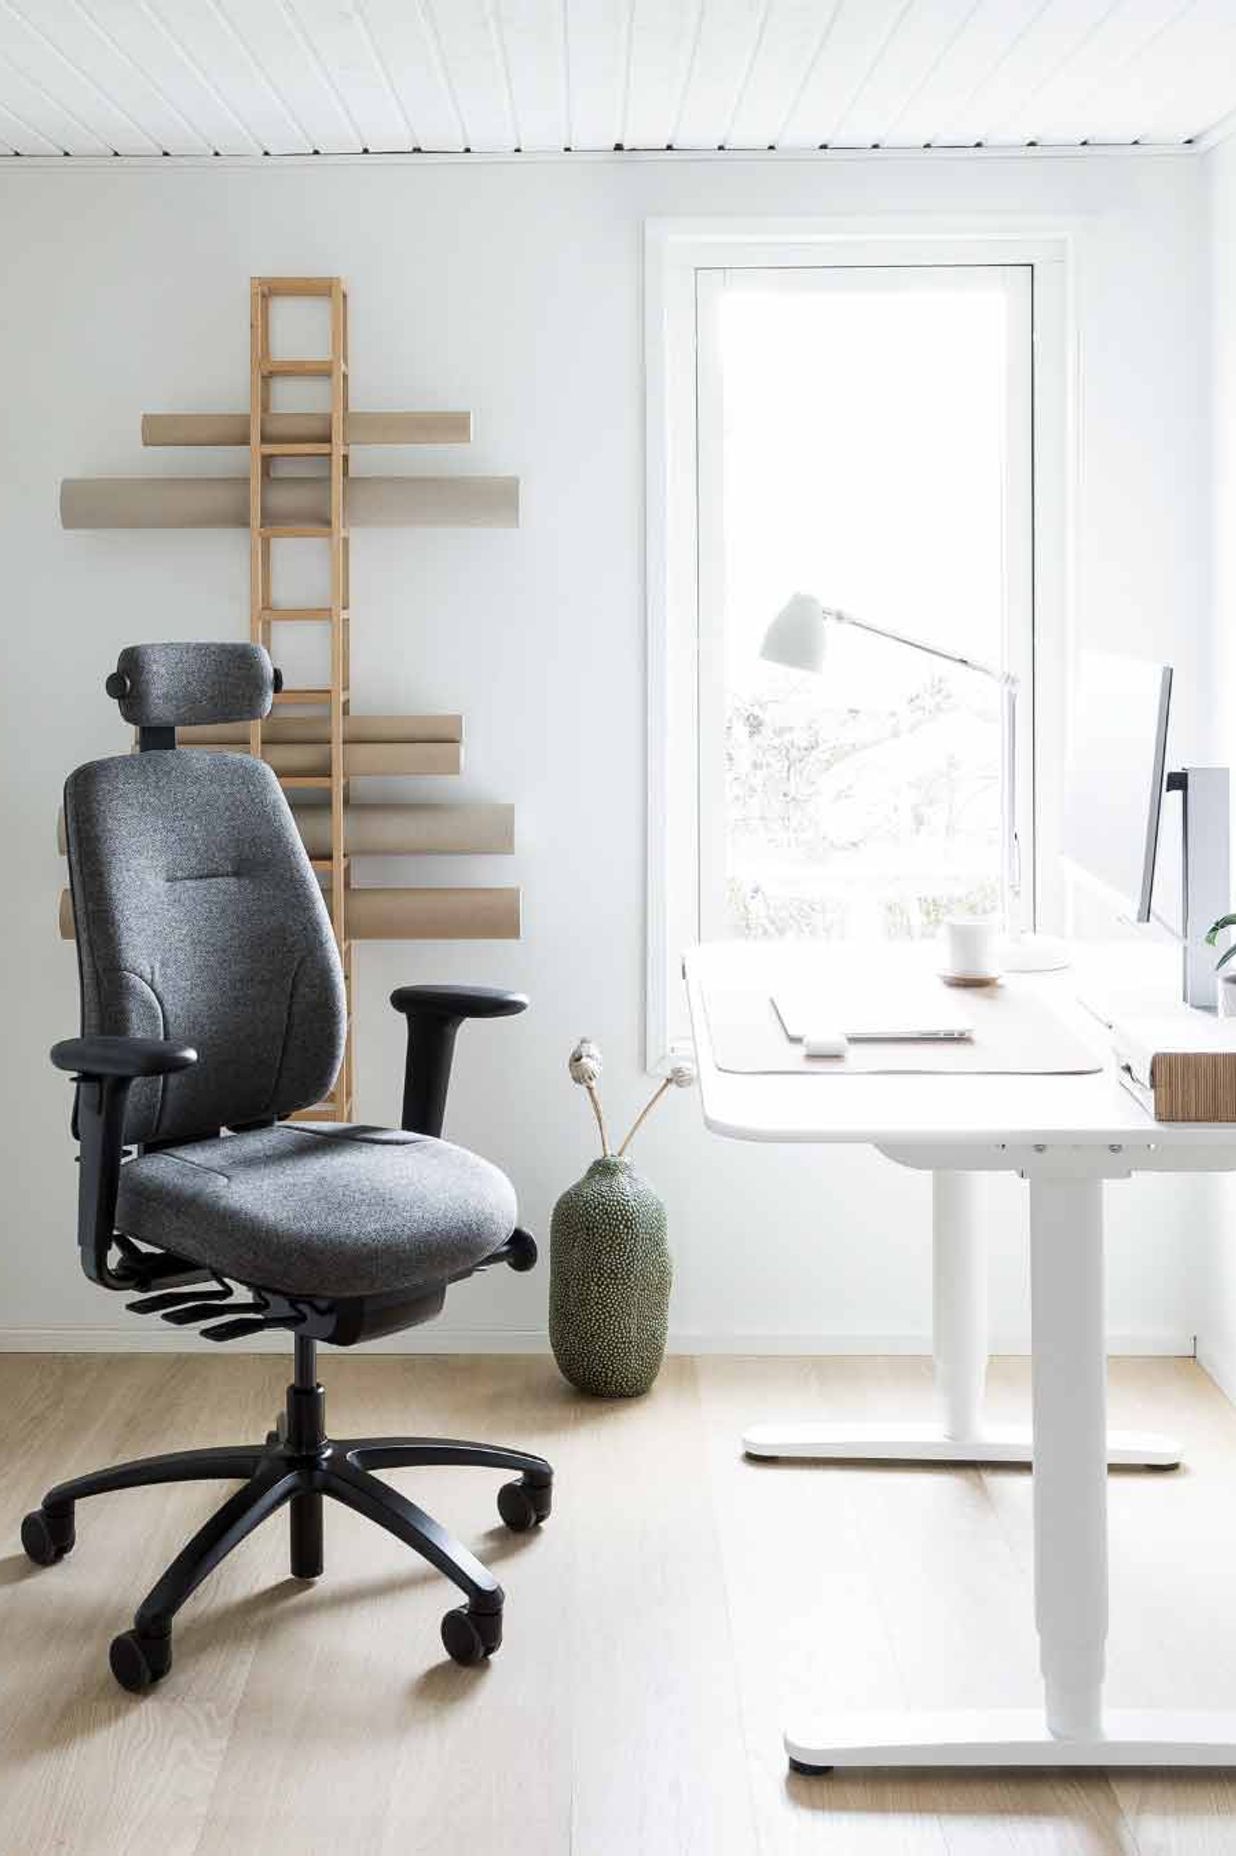 The RH Logic chair comprises 69% recycled plastic, 19% recycled steel and 94% recycled aluminium | Featured: RH Logic 200 with Melange Nap 171 by Kvadrat